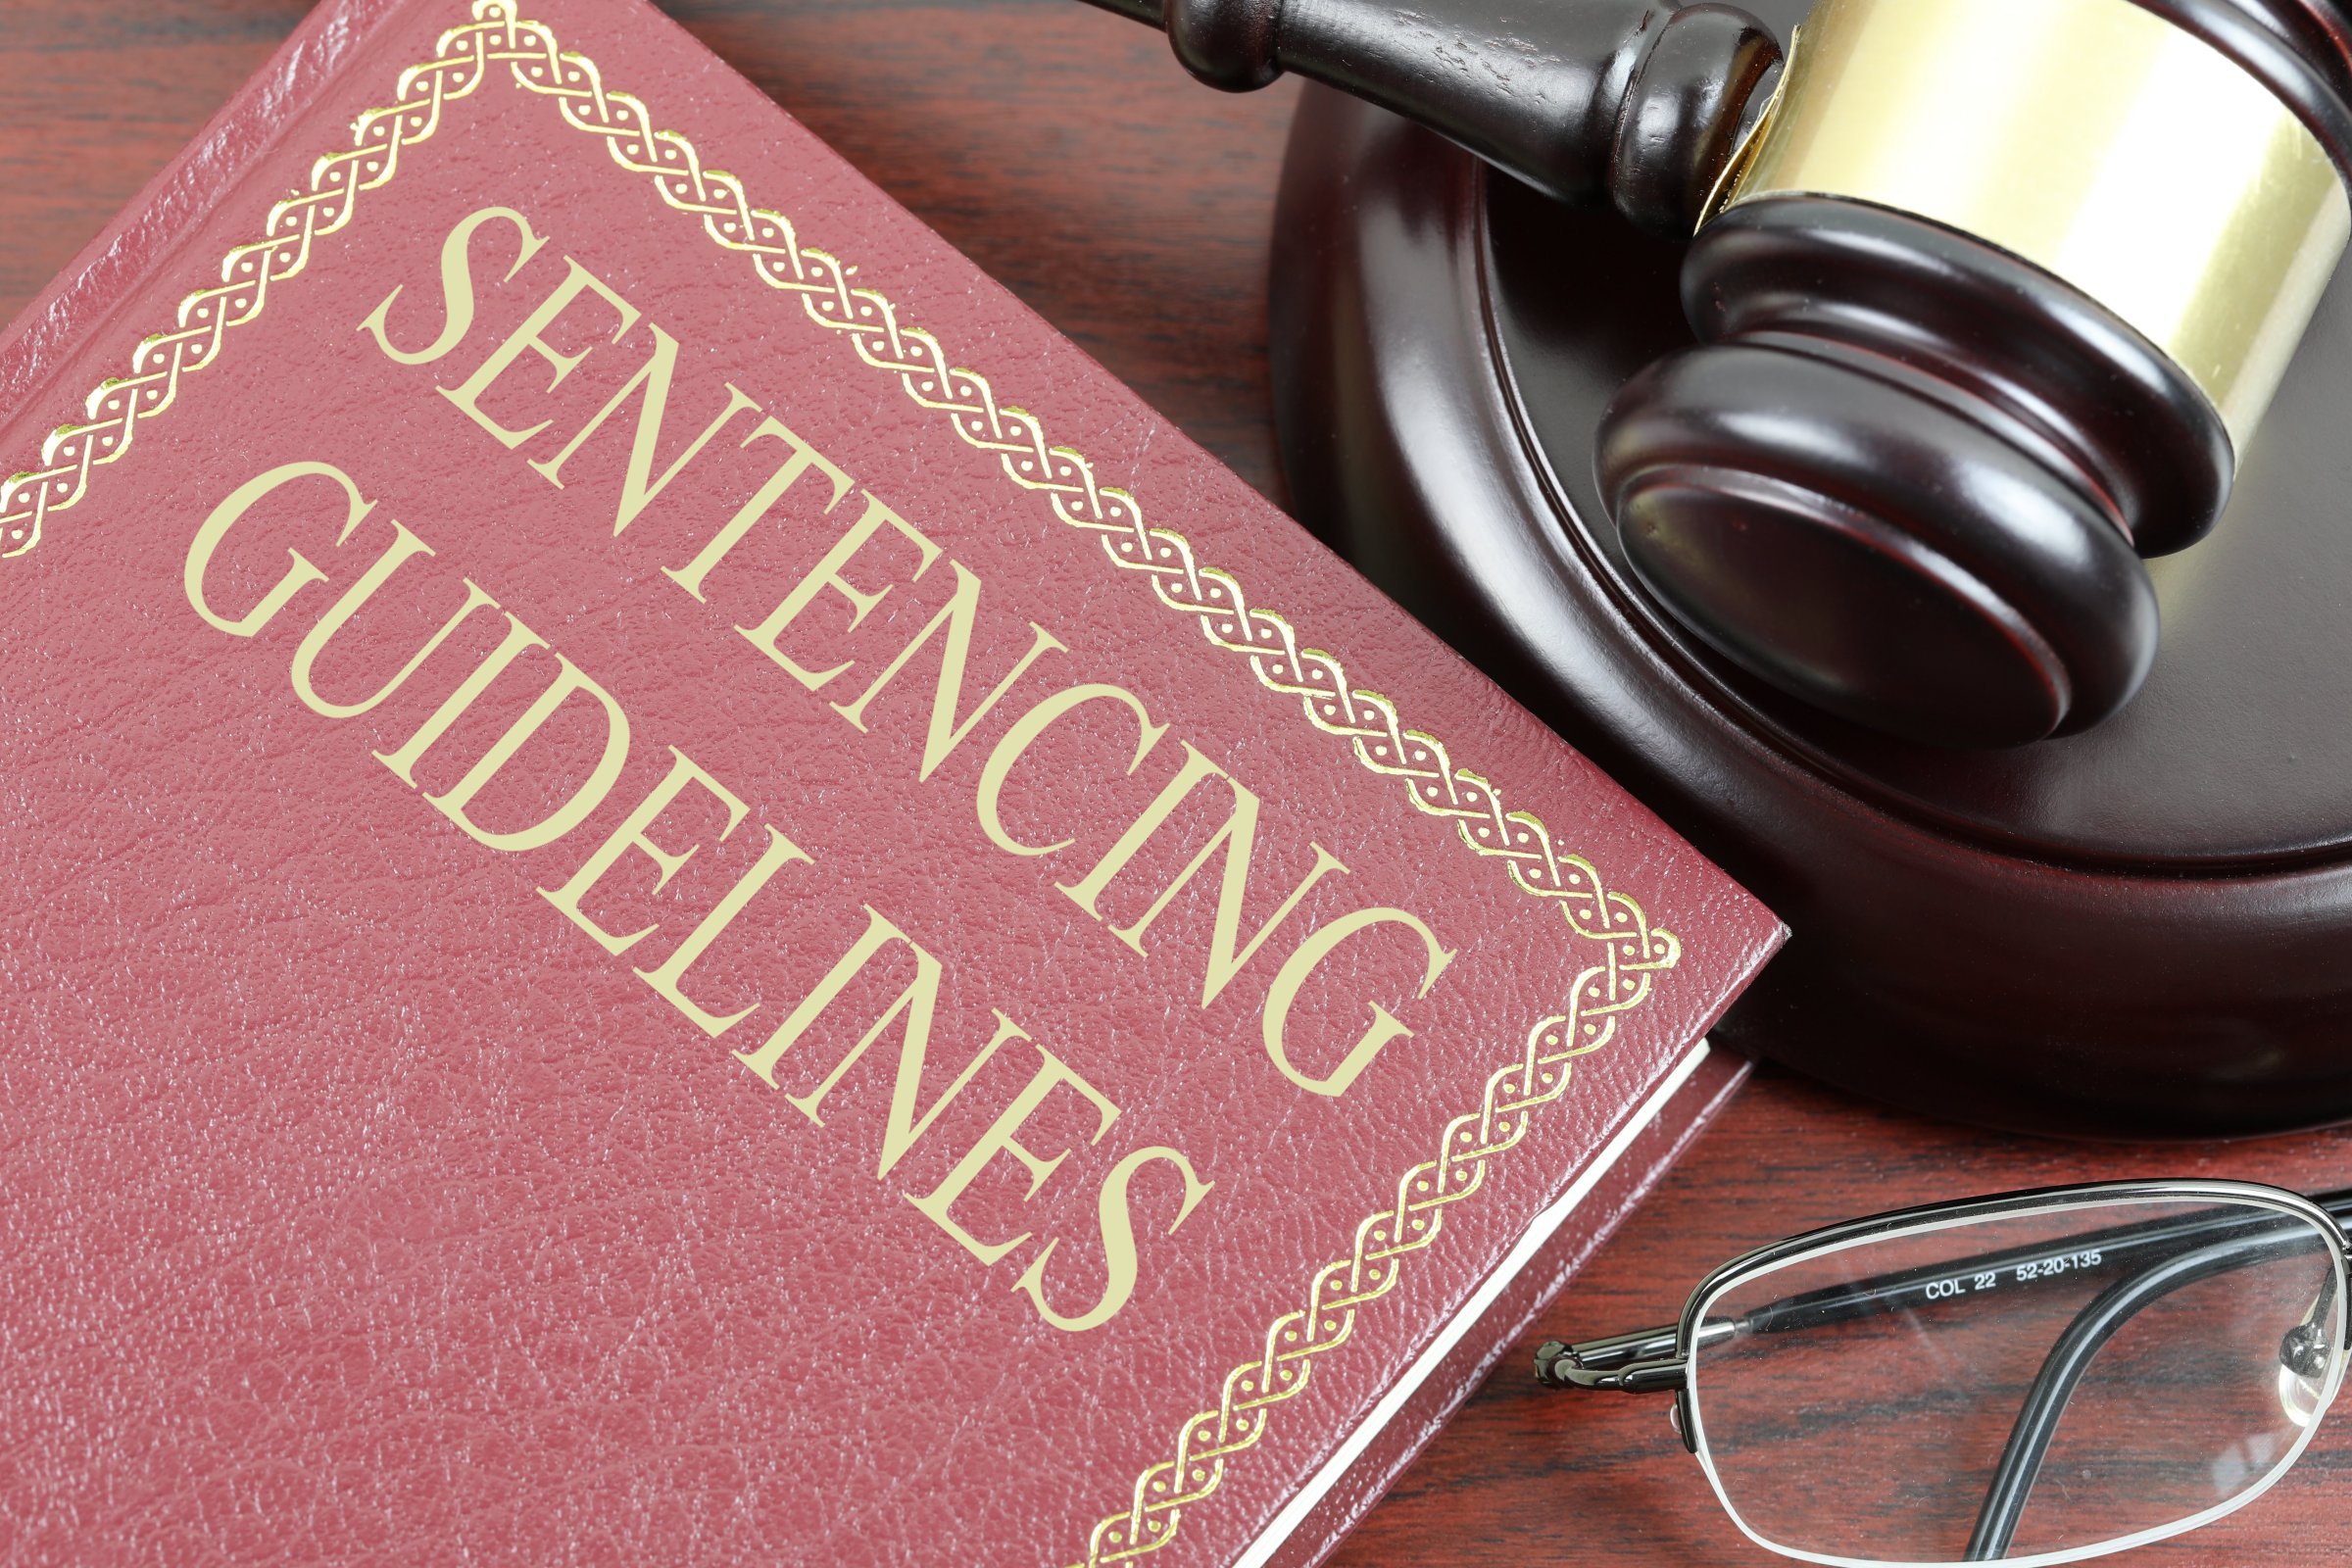 Sentencing Guidelines Free of Charge Creative Commons Law book image